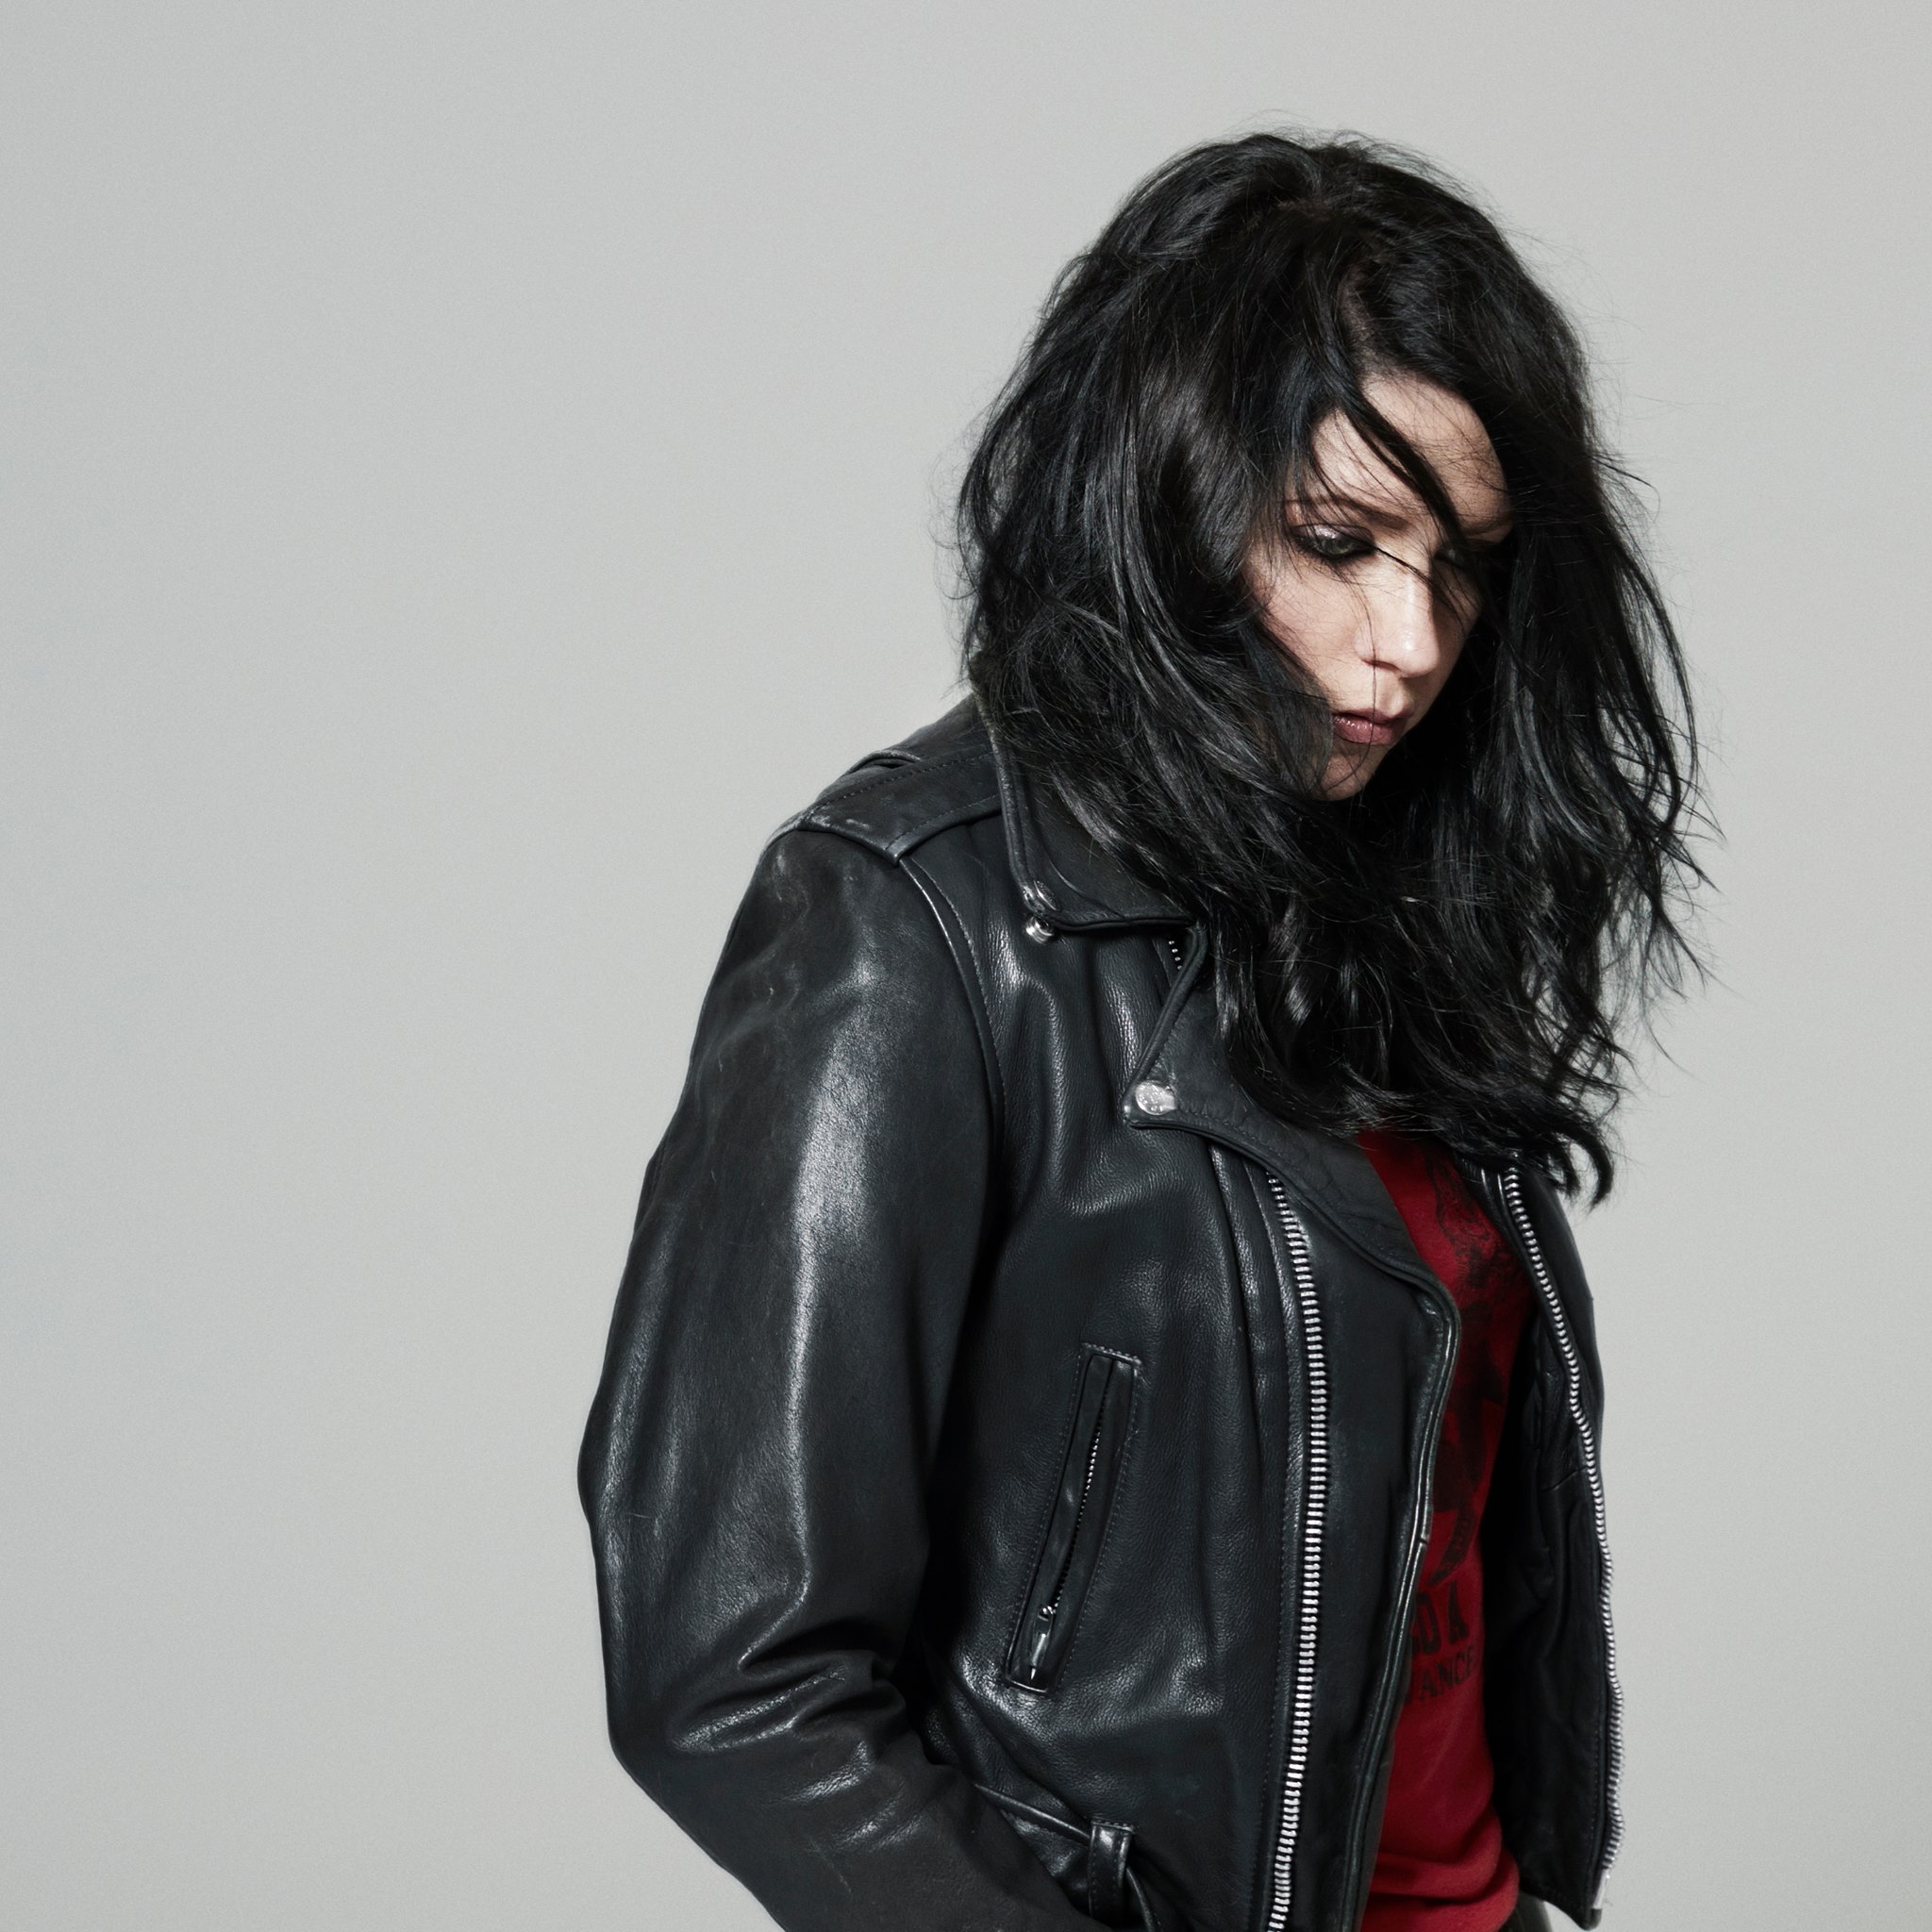 K.Flay release new song ‘Run For Your  Life’ from Tomb Raider